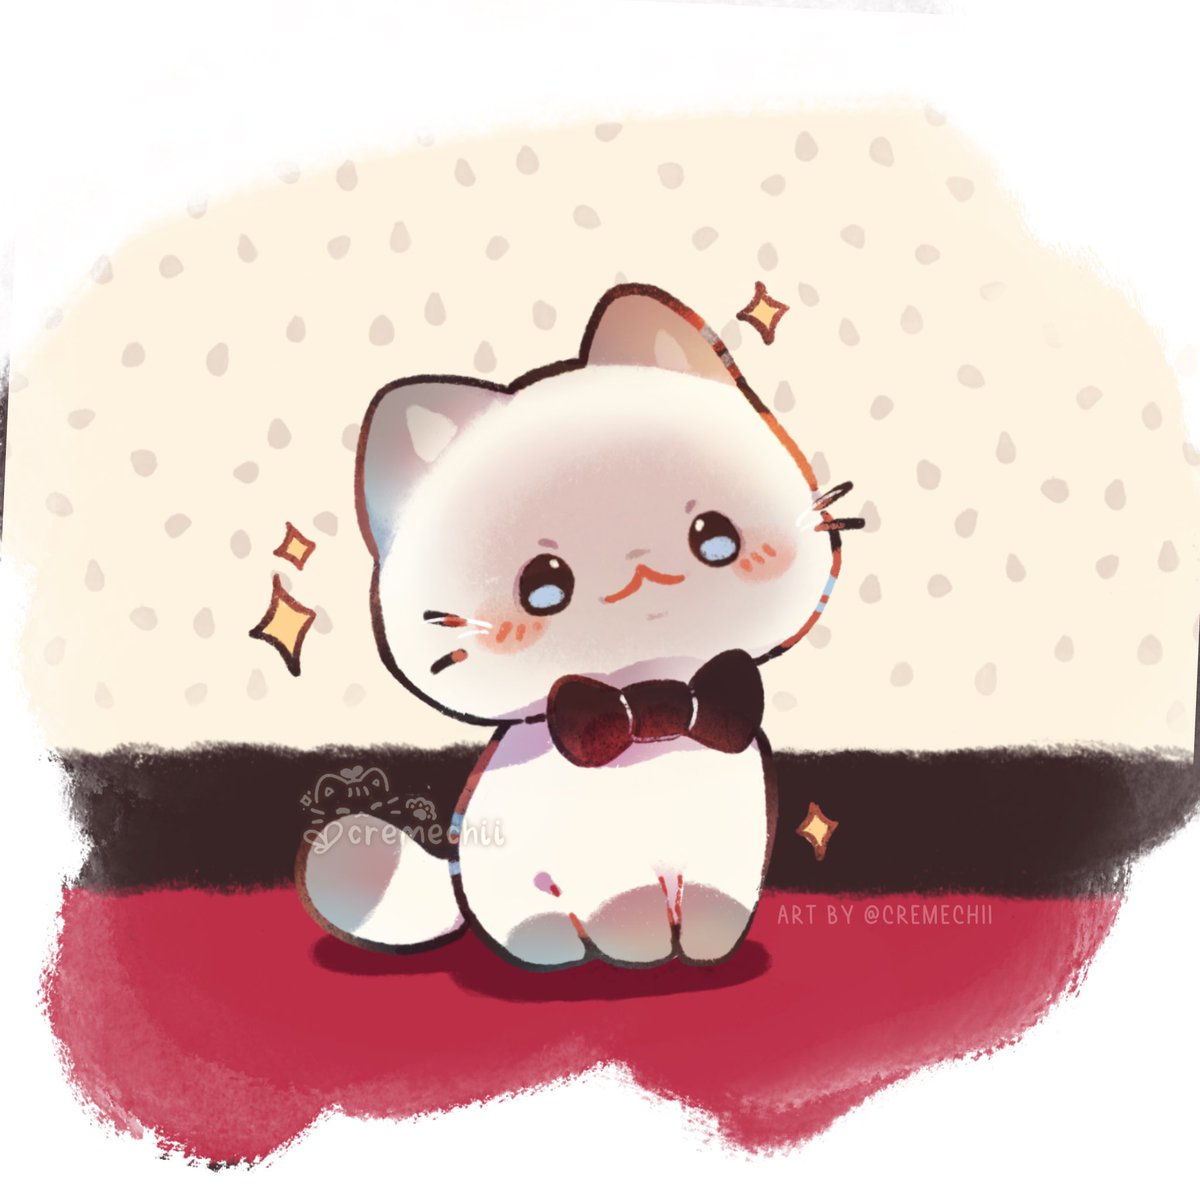 「A fancy kitty 」|Chii🌻のイラスト